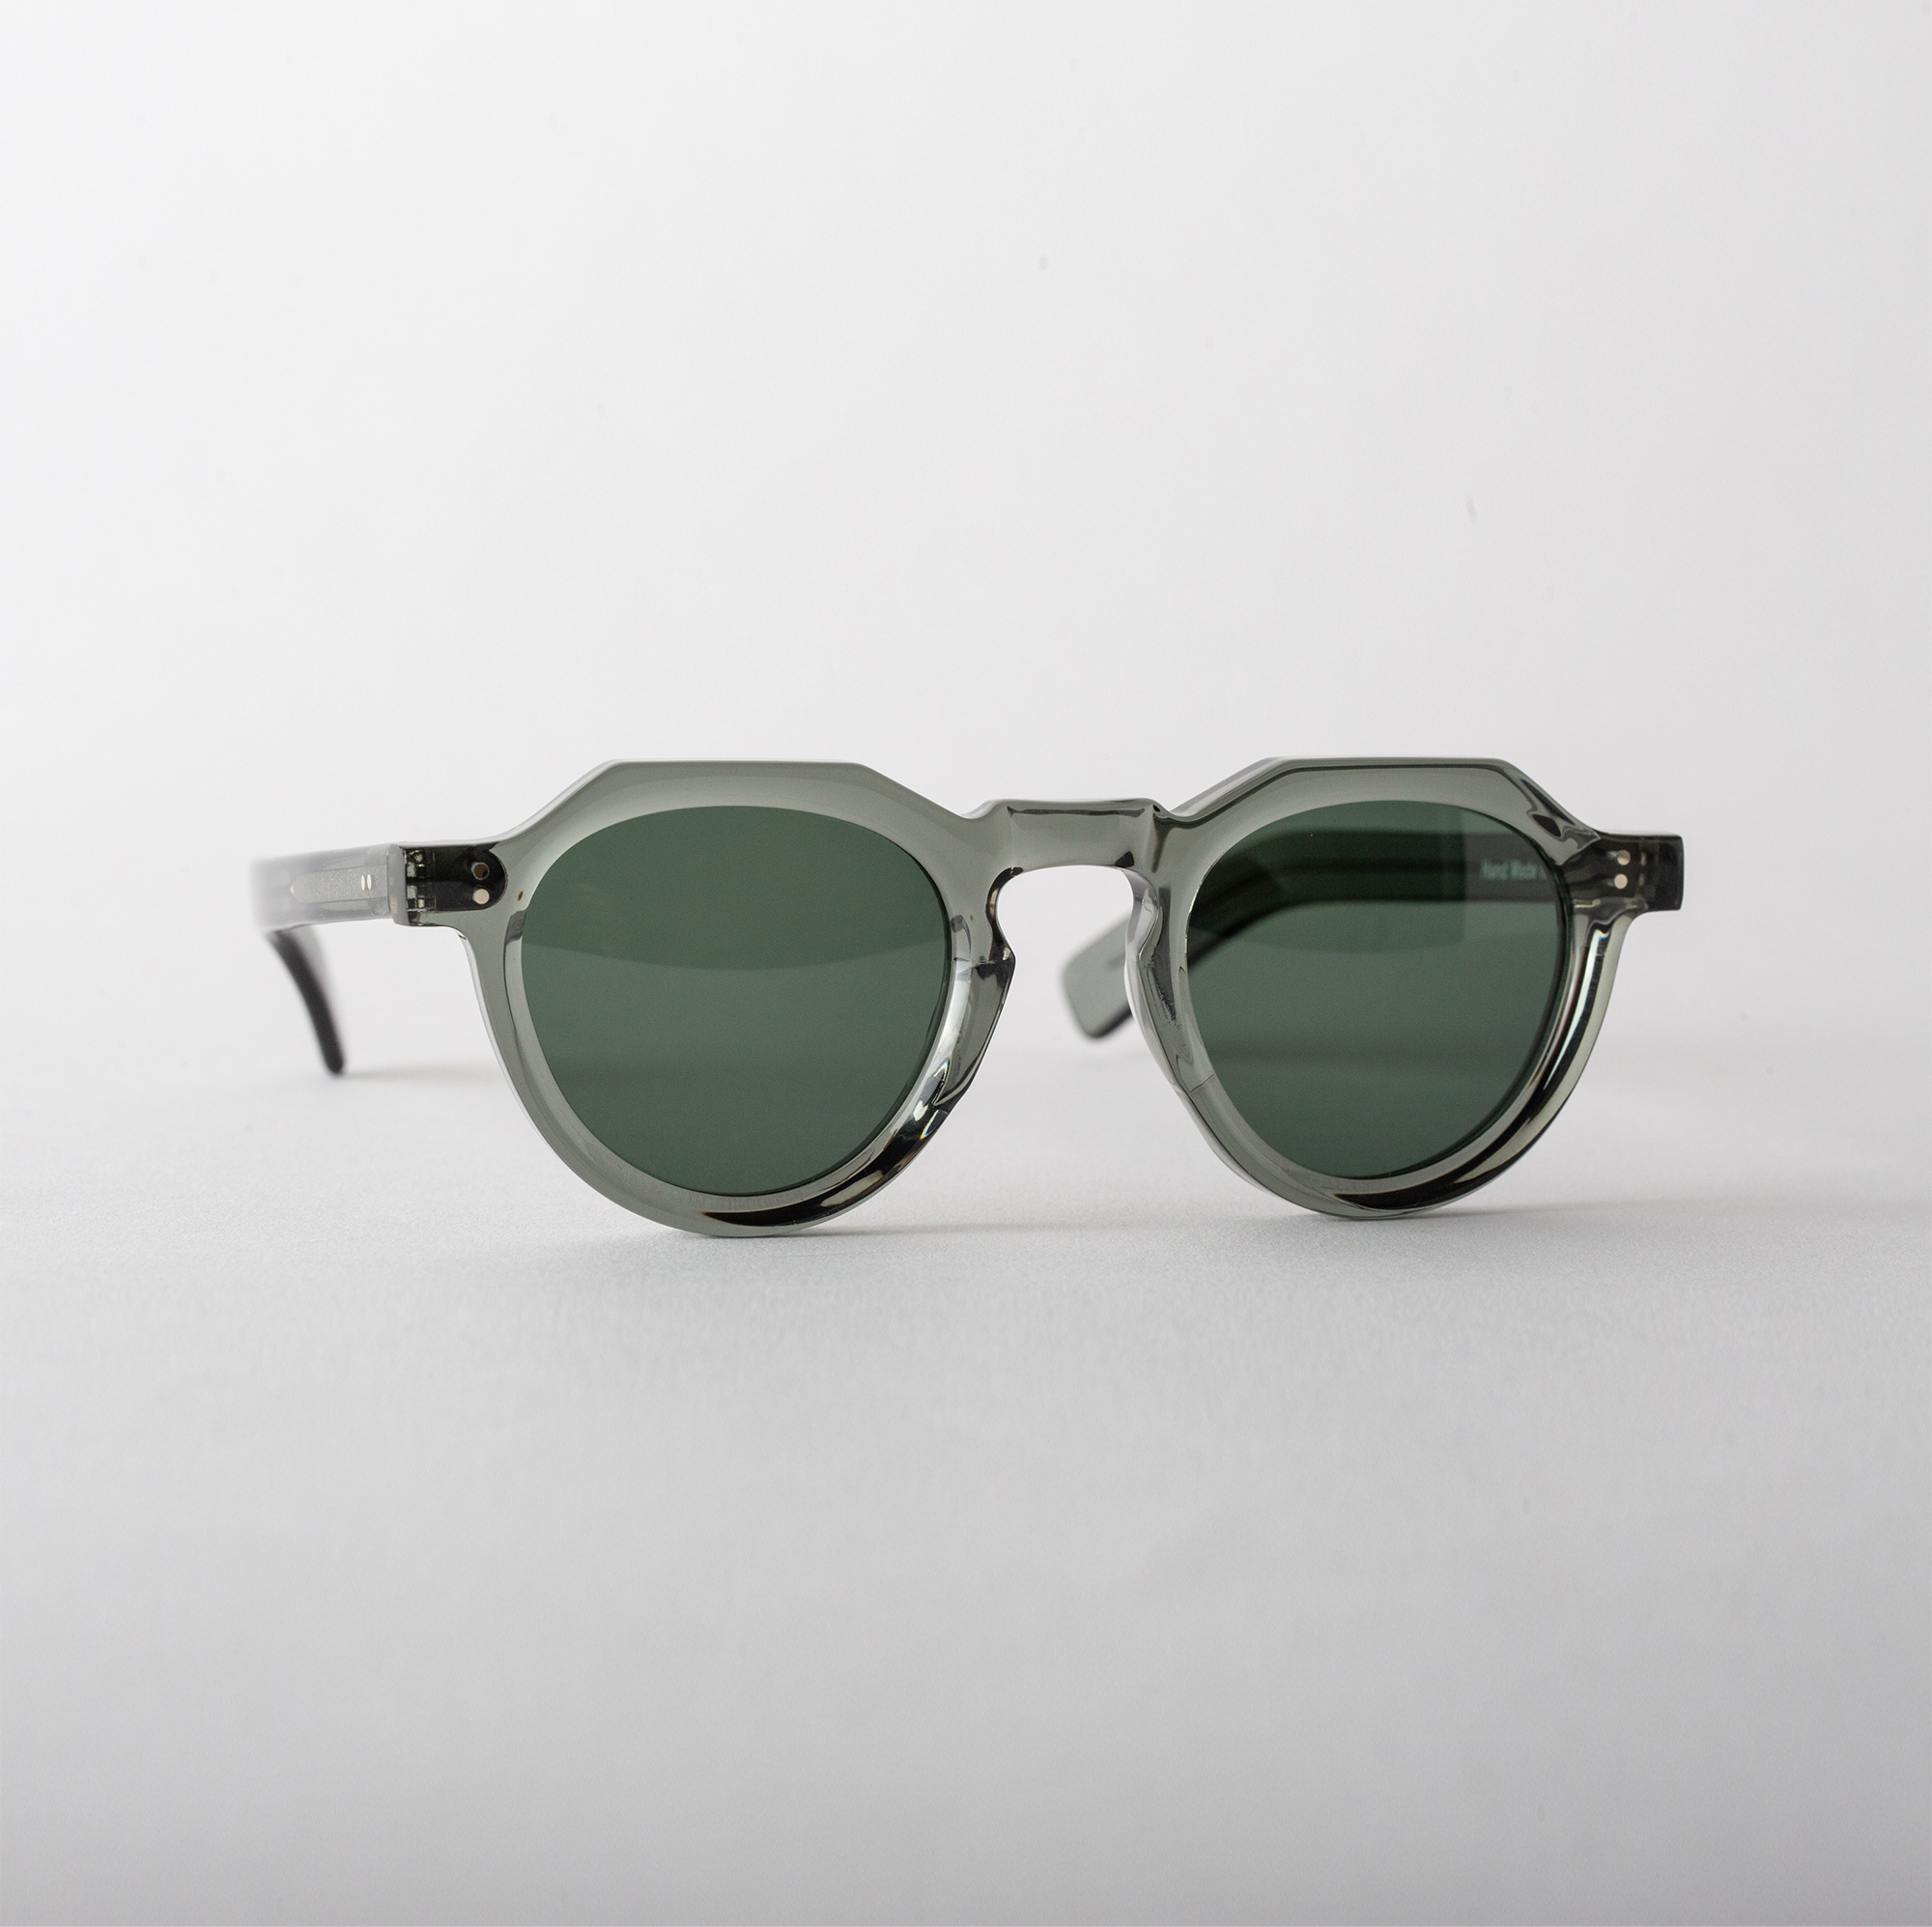 Sunglasses MOD.01 in Lovat green color by Arpenteur